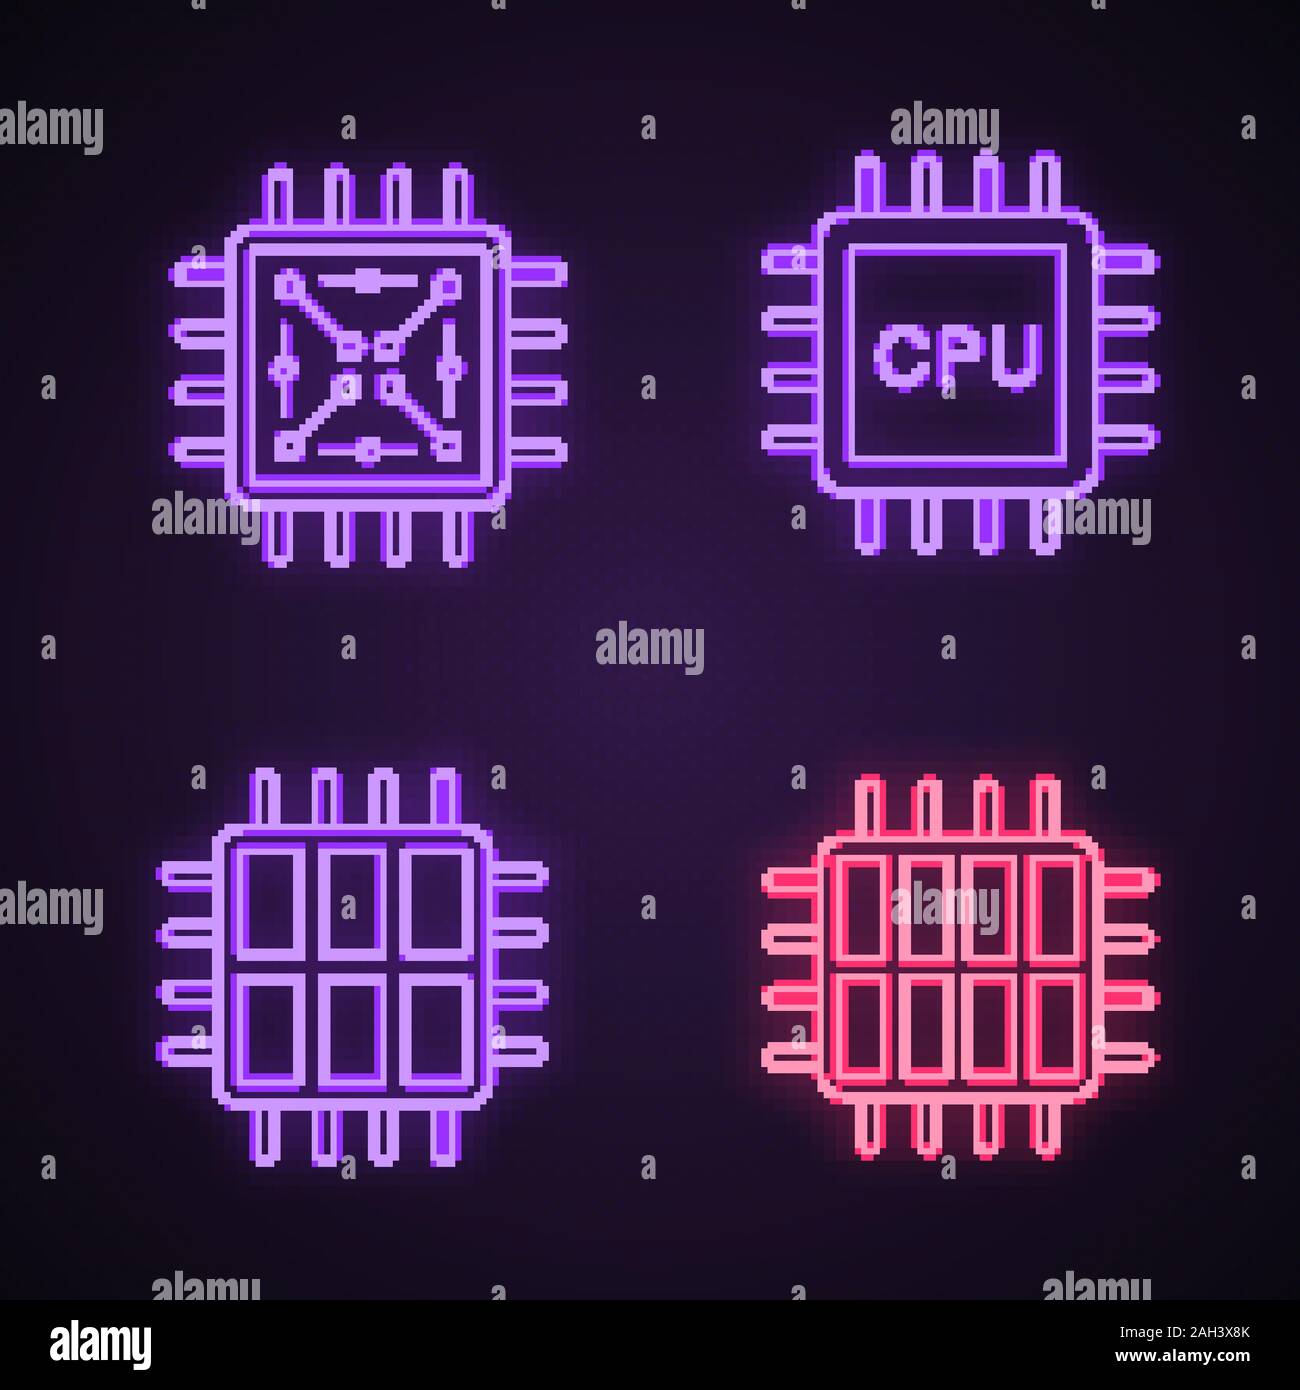 Processors neon light icons set. Chip, microprocessor, CPU, six and octa core processors. Glowing signs. Vector isolated illustrations Stock Vector